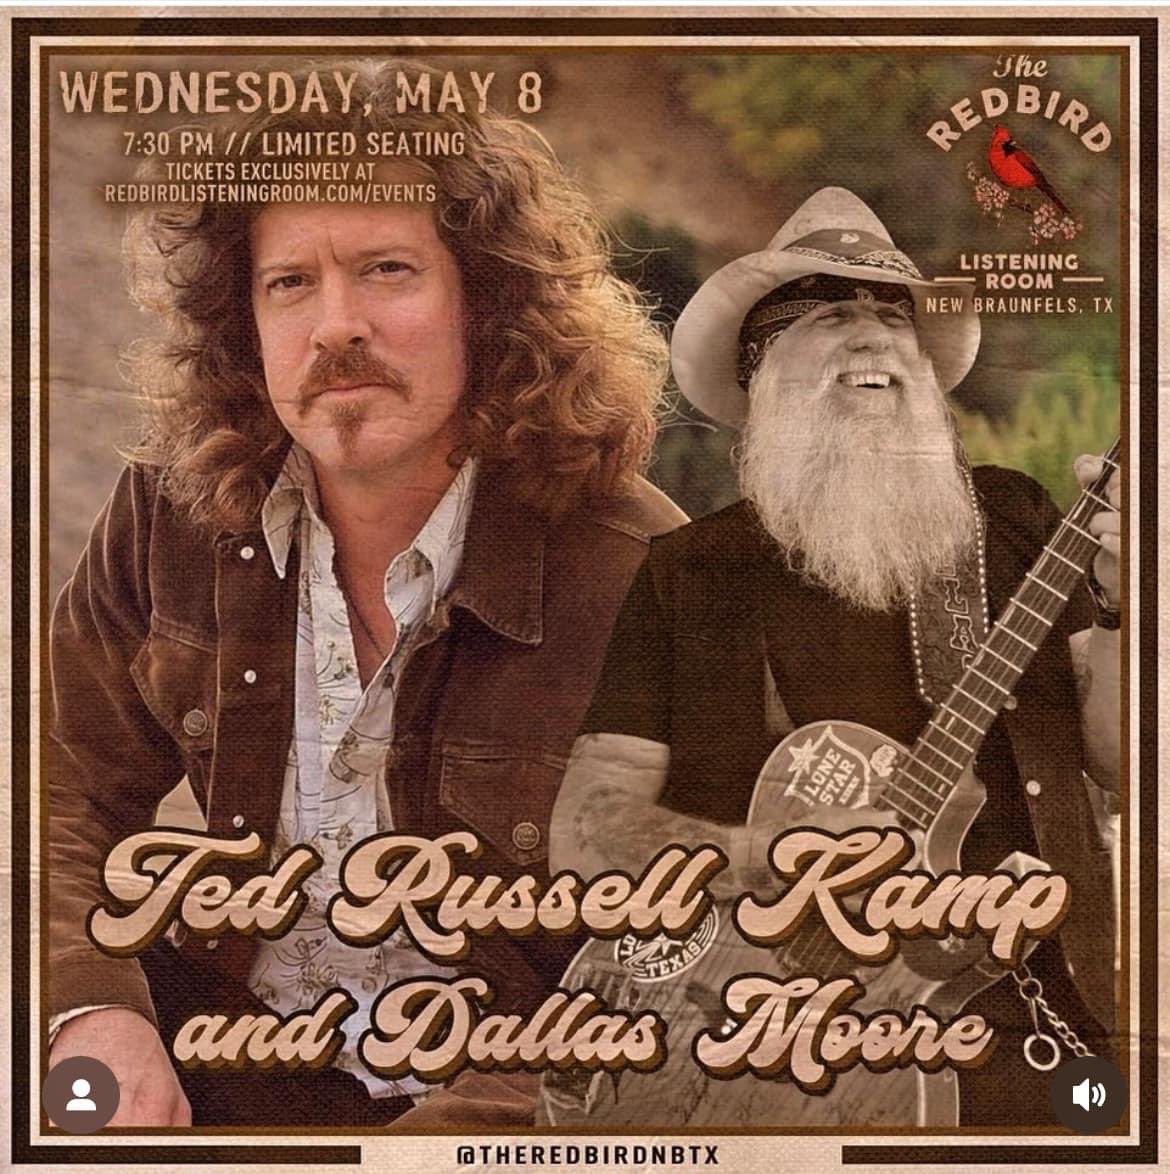 NEW BRAUNFELS, TX TONIGHT 🔥 Dallas Moore & @TedRussellKamp LIVE at The Redbird Listening Room in New Braunfels, Texas 7:30pm 🔥🎶🔥🎶🔥🎶 TIX AVAILABLE AT THE DOOR 🎟️🎟️🎟️🎟️🎟️🎟️🎟️ ** LIMITED SEATING ~ BYOB ~ ALL AGES SHOW #Songwriters #Texas #CountryMusic #NewMusic